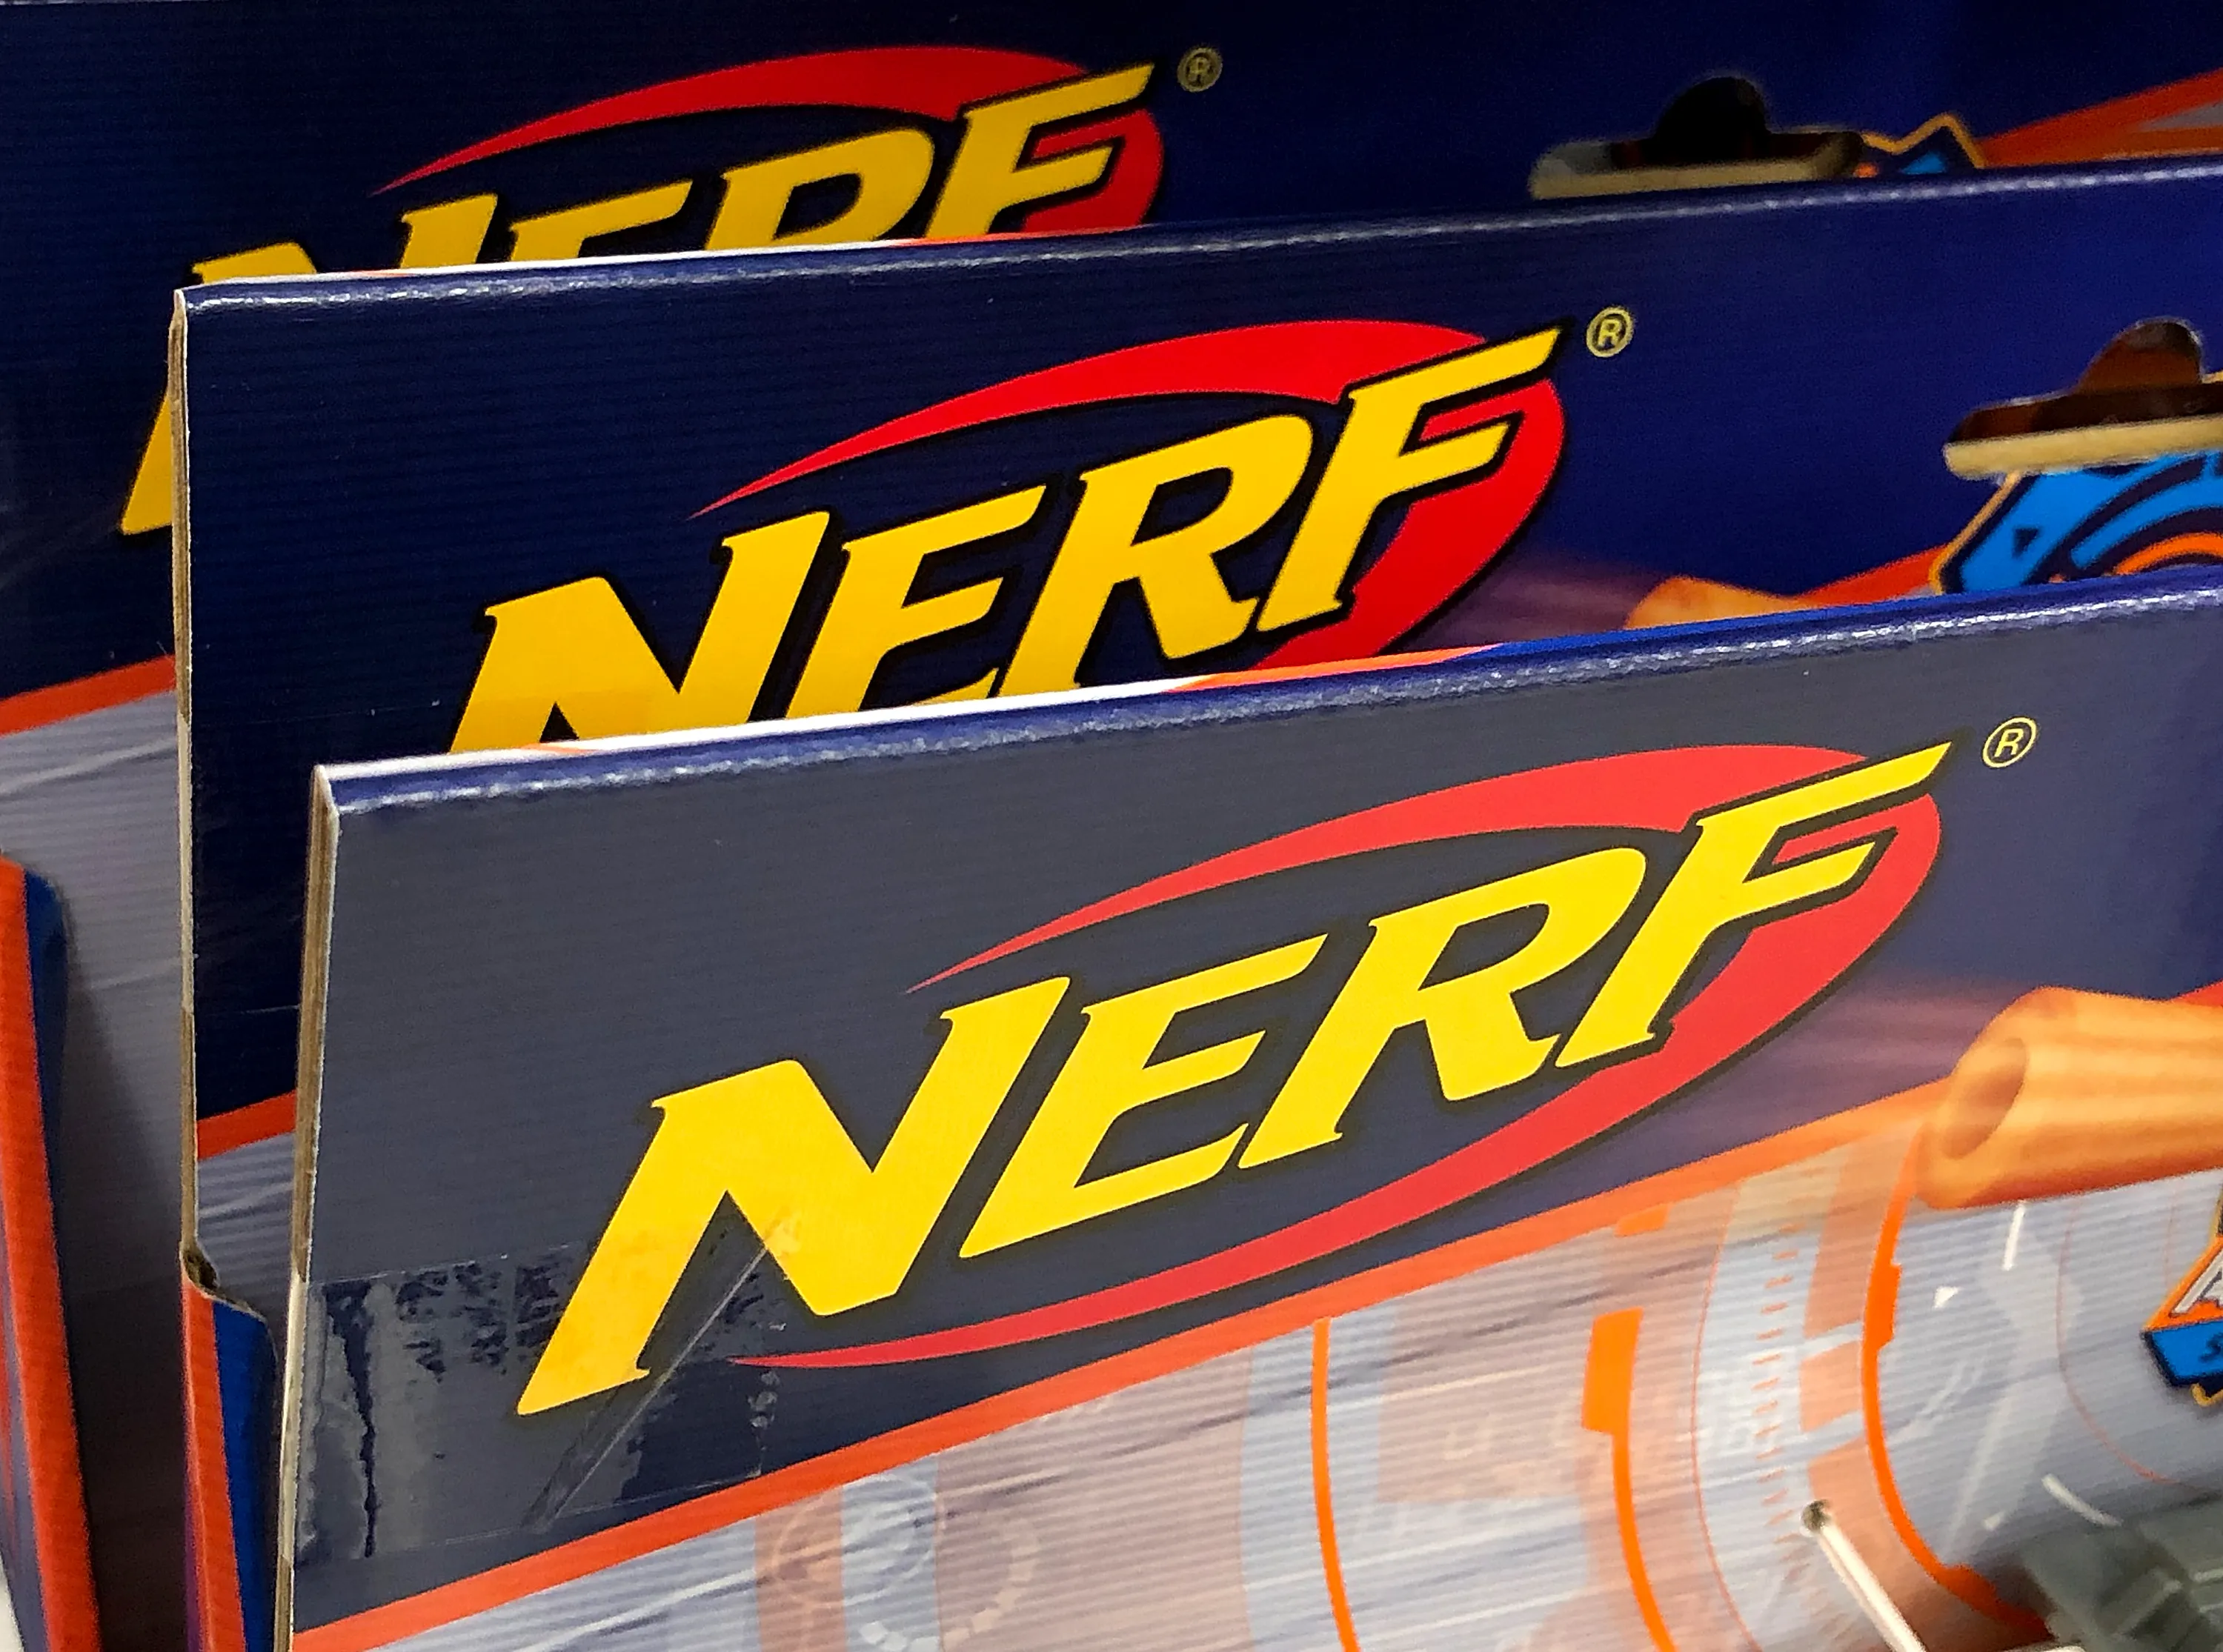 Nerf Guns: New Ultra Blasters on Sale With Special Darts | Money